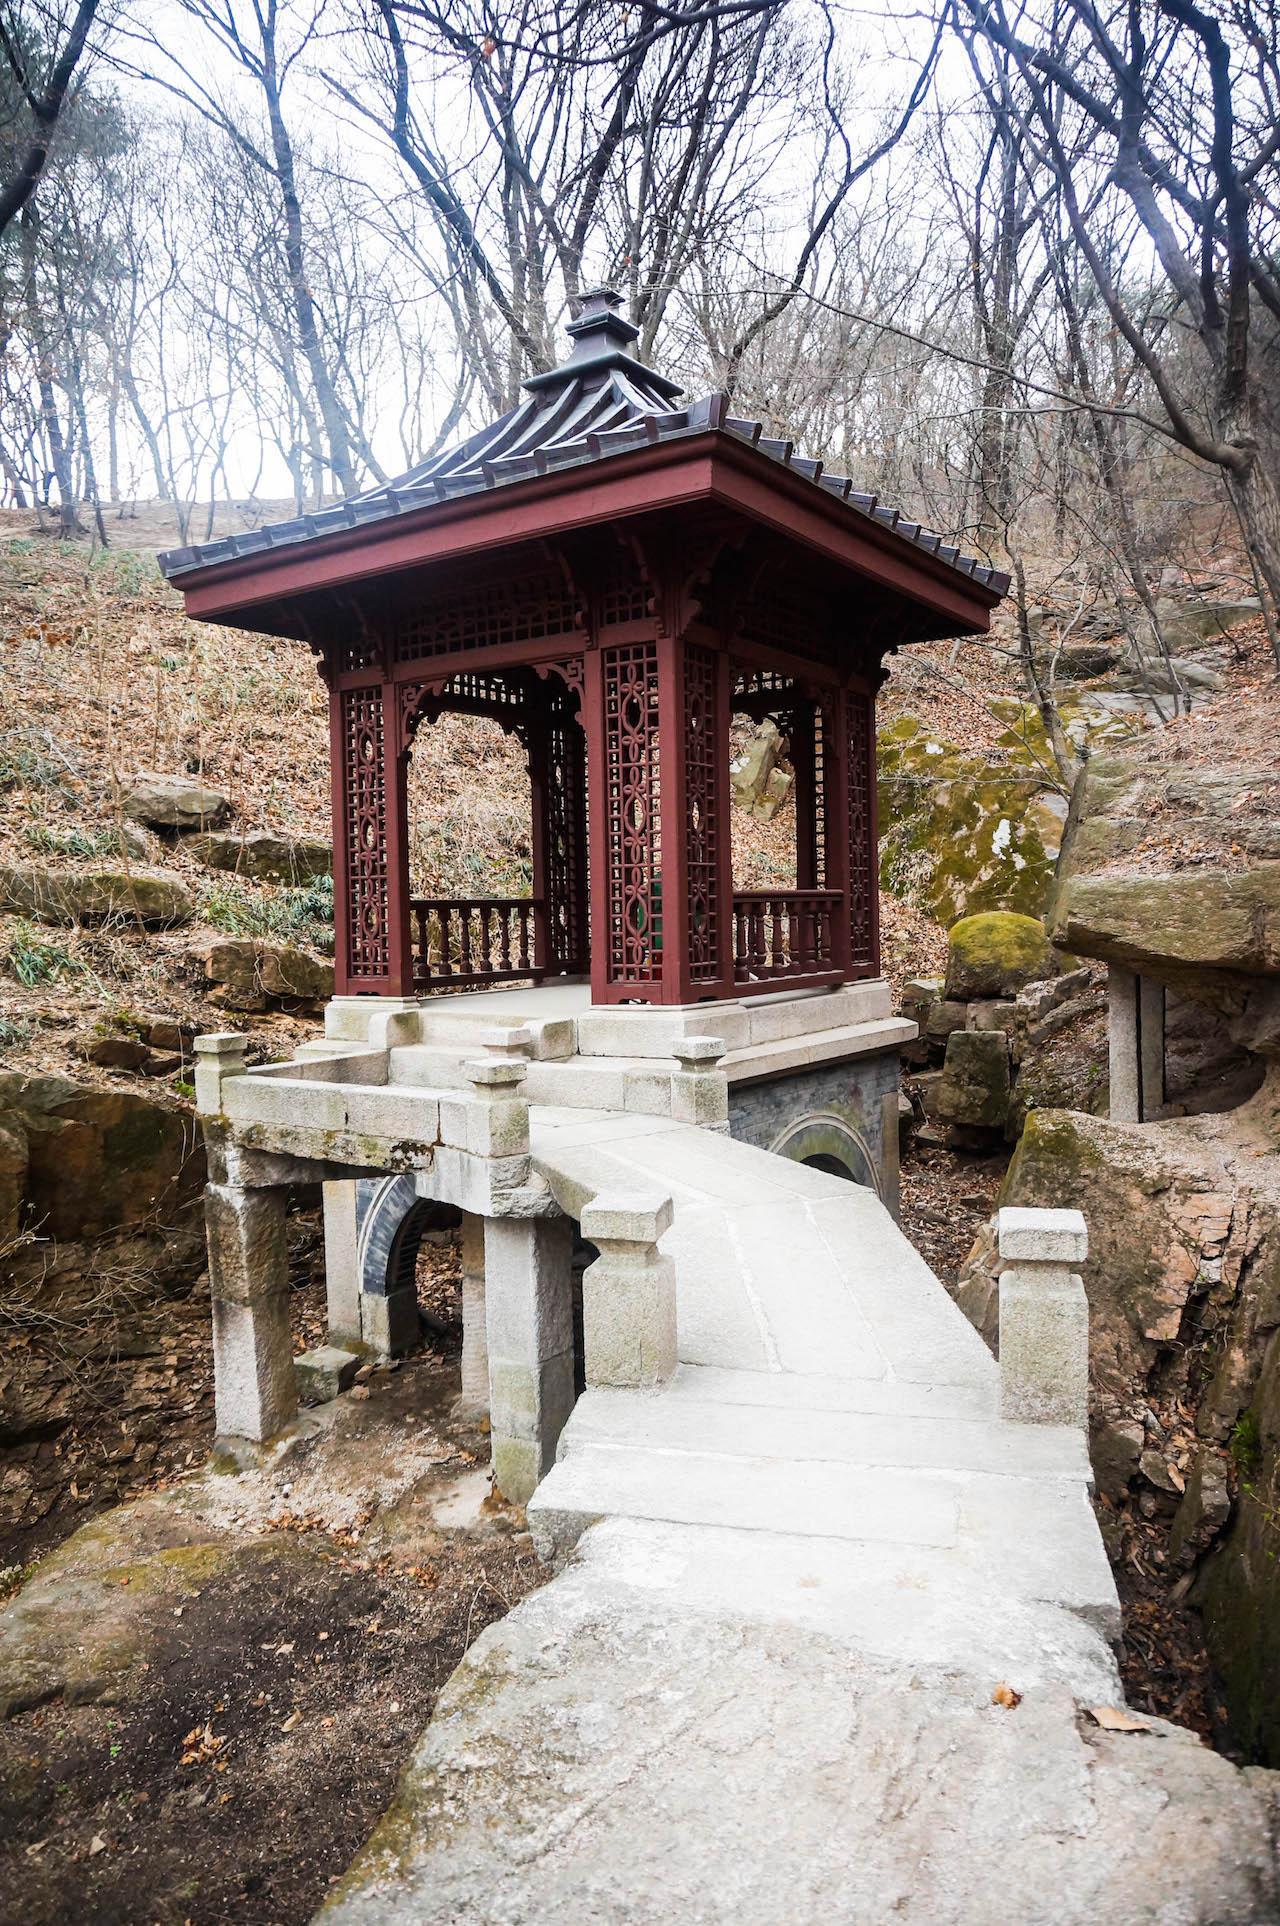 Stone steps lead up to the traditional temple of Seokpajeong, nestled amidst trees and a rural landscape.